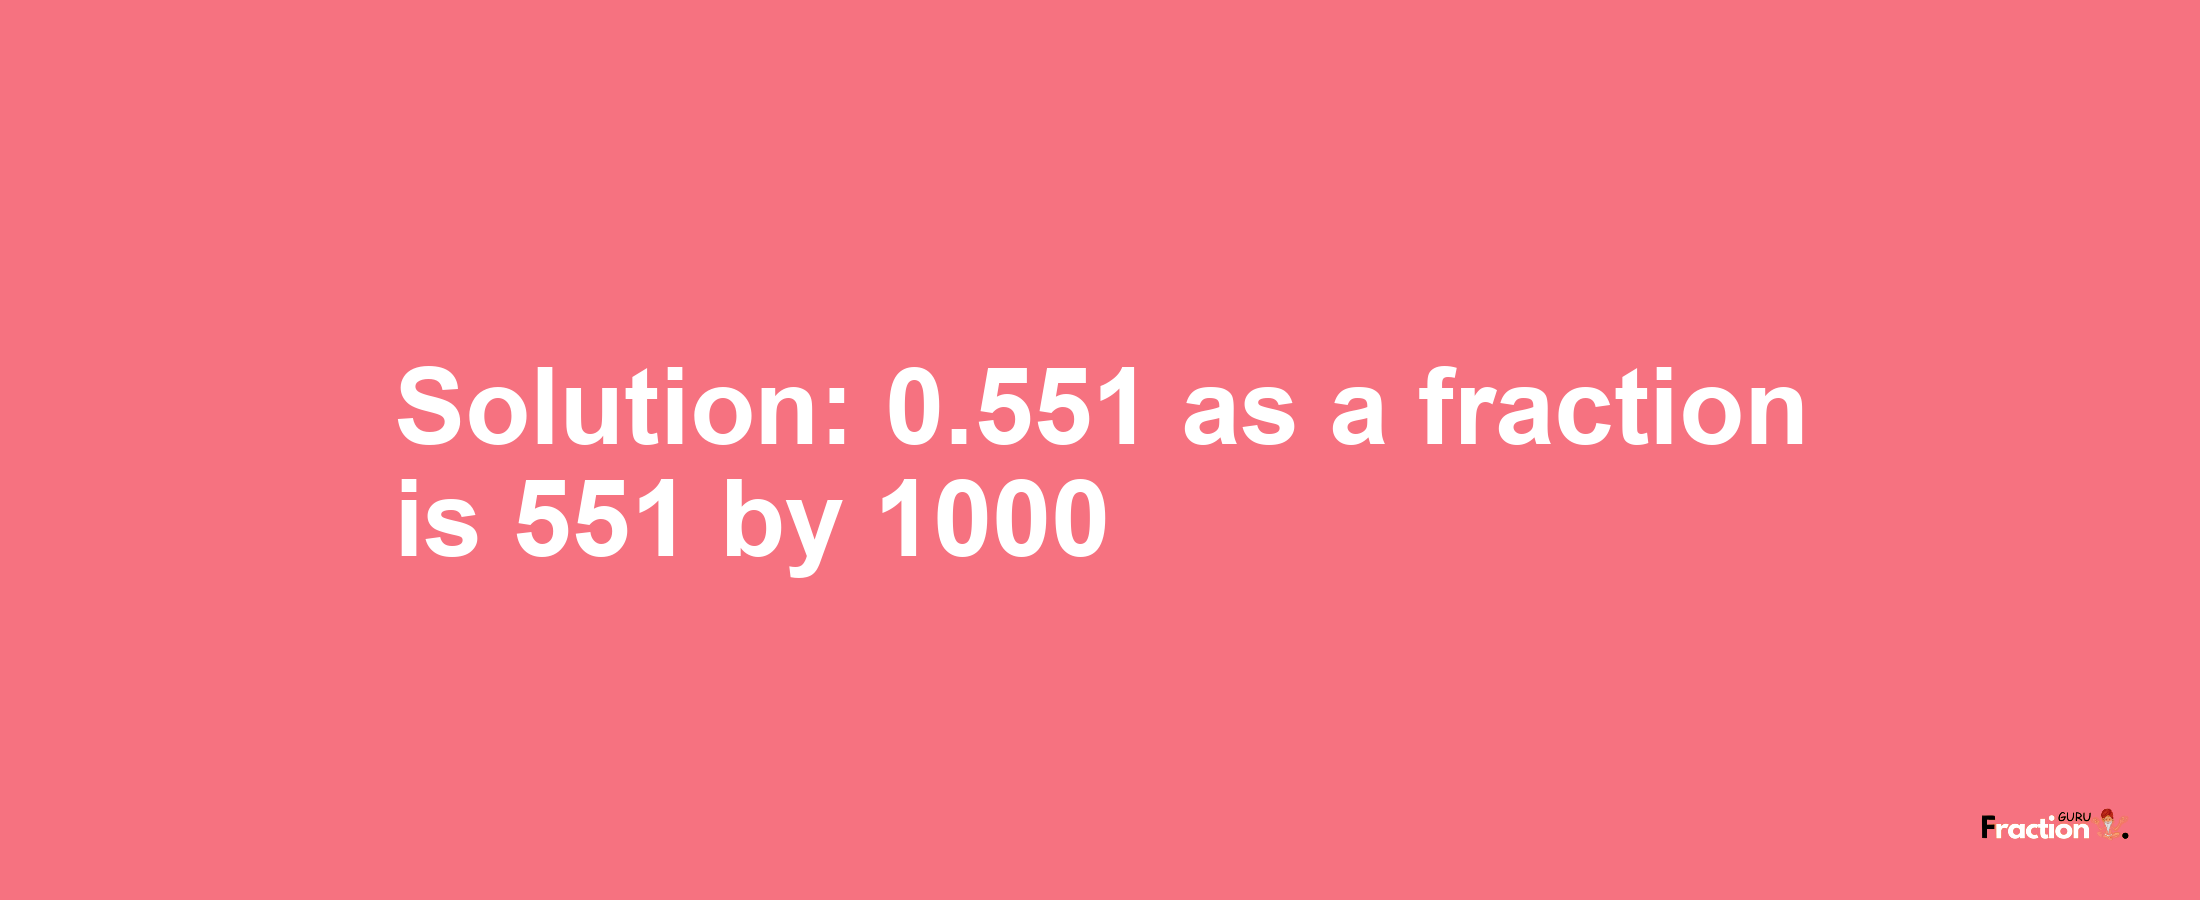 Solution:0.551 as a fraction is 551/1000